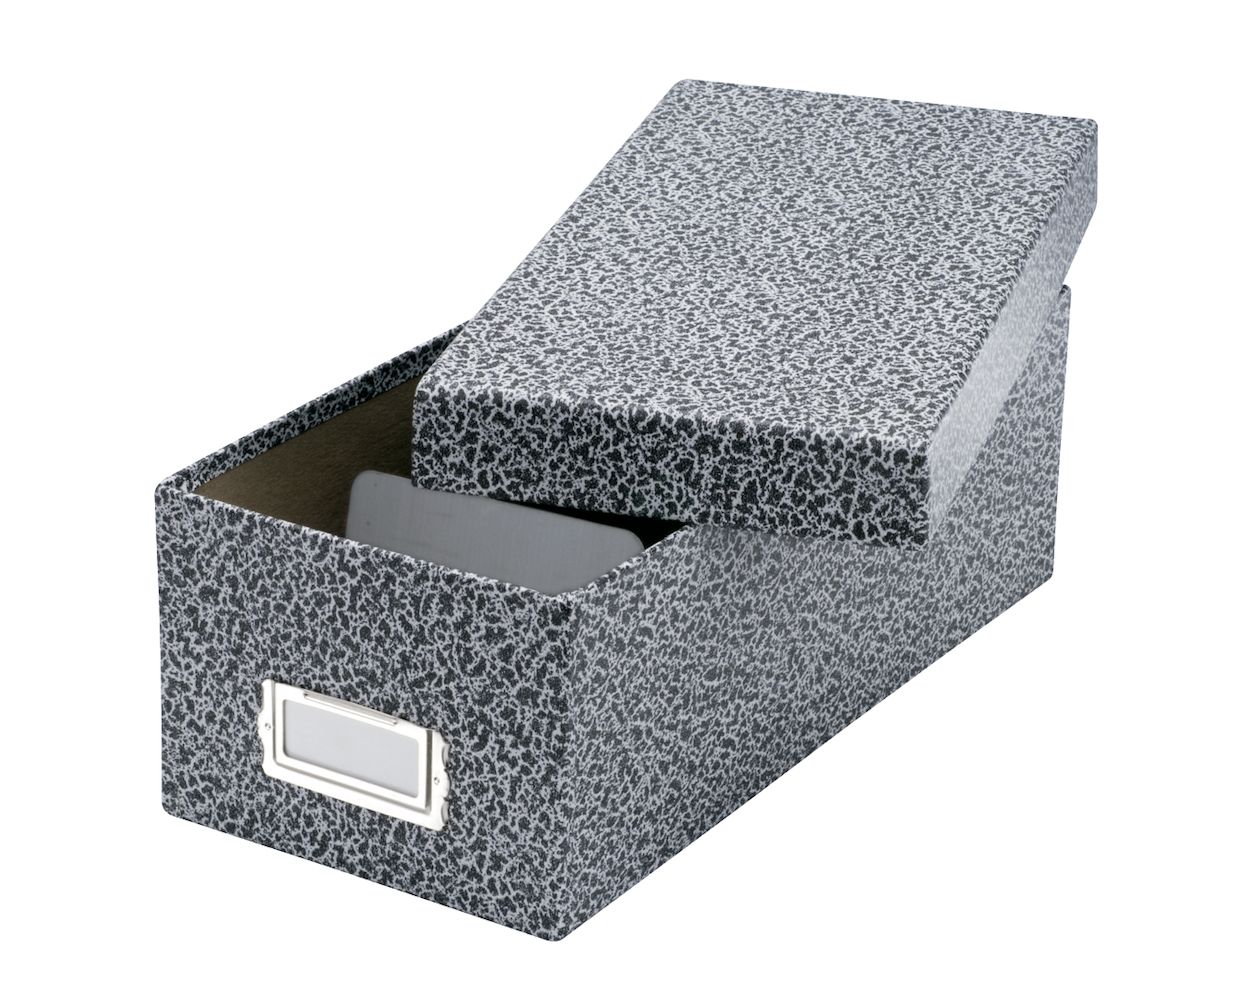 Wholesale Oxford Index Card Storage Boxes OXF40588 Discount Price